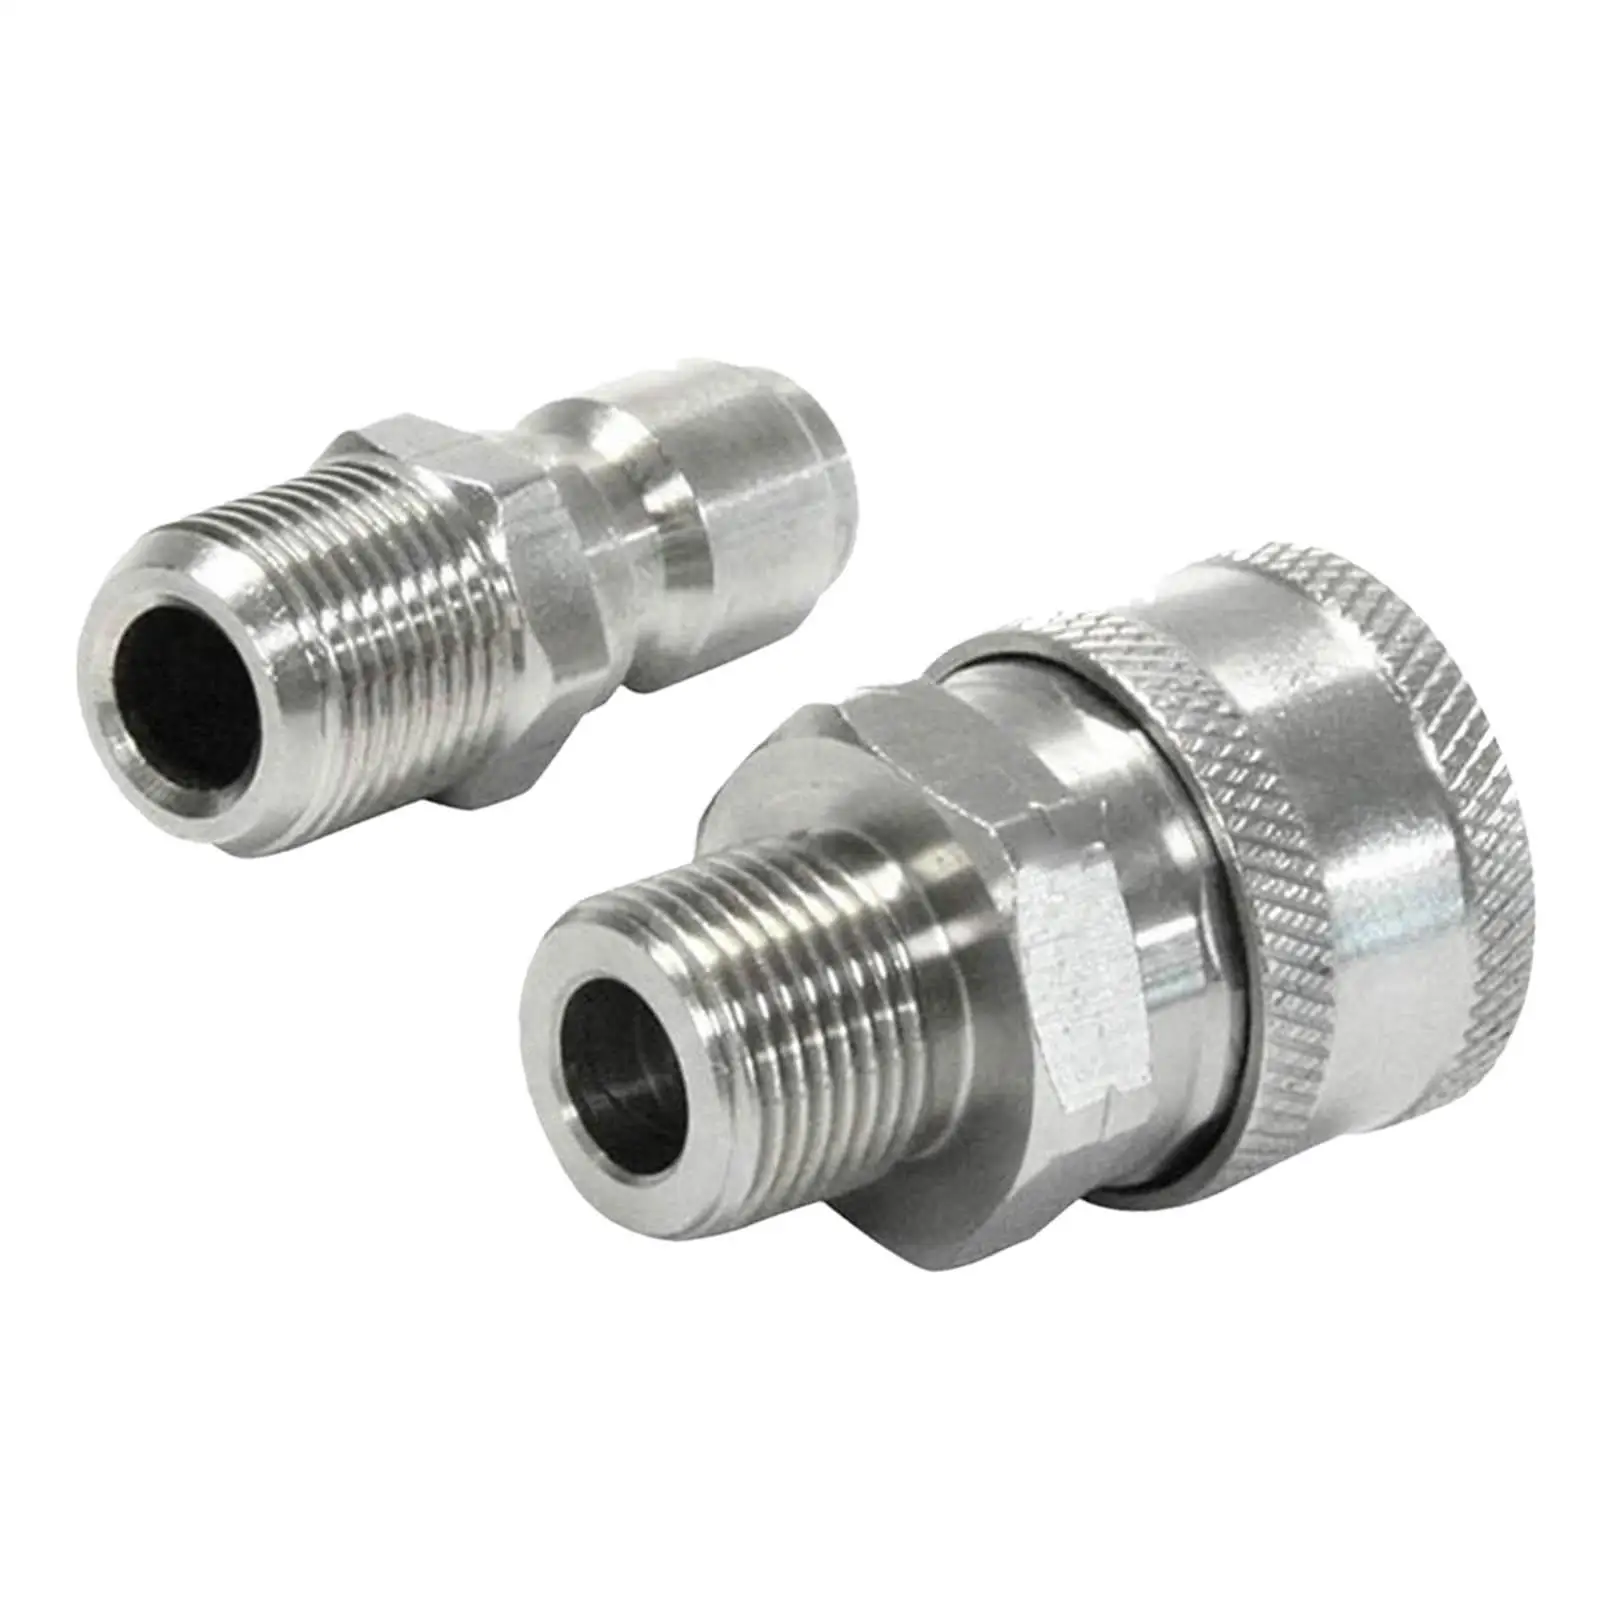 2Pcs Pressure Washer Adapter Set 3/8 inch Replacement Quick Release Connector Daily Tool